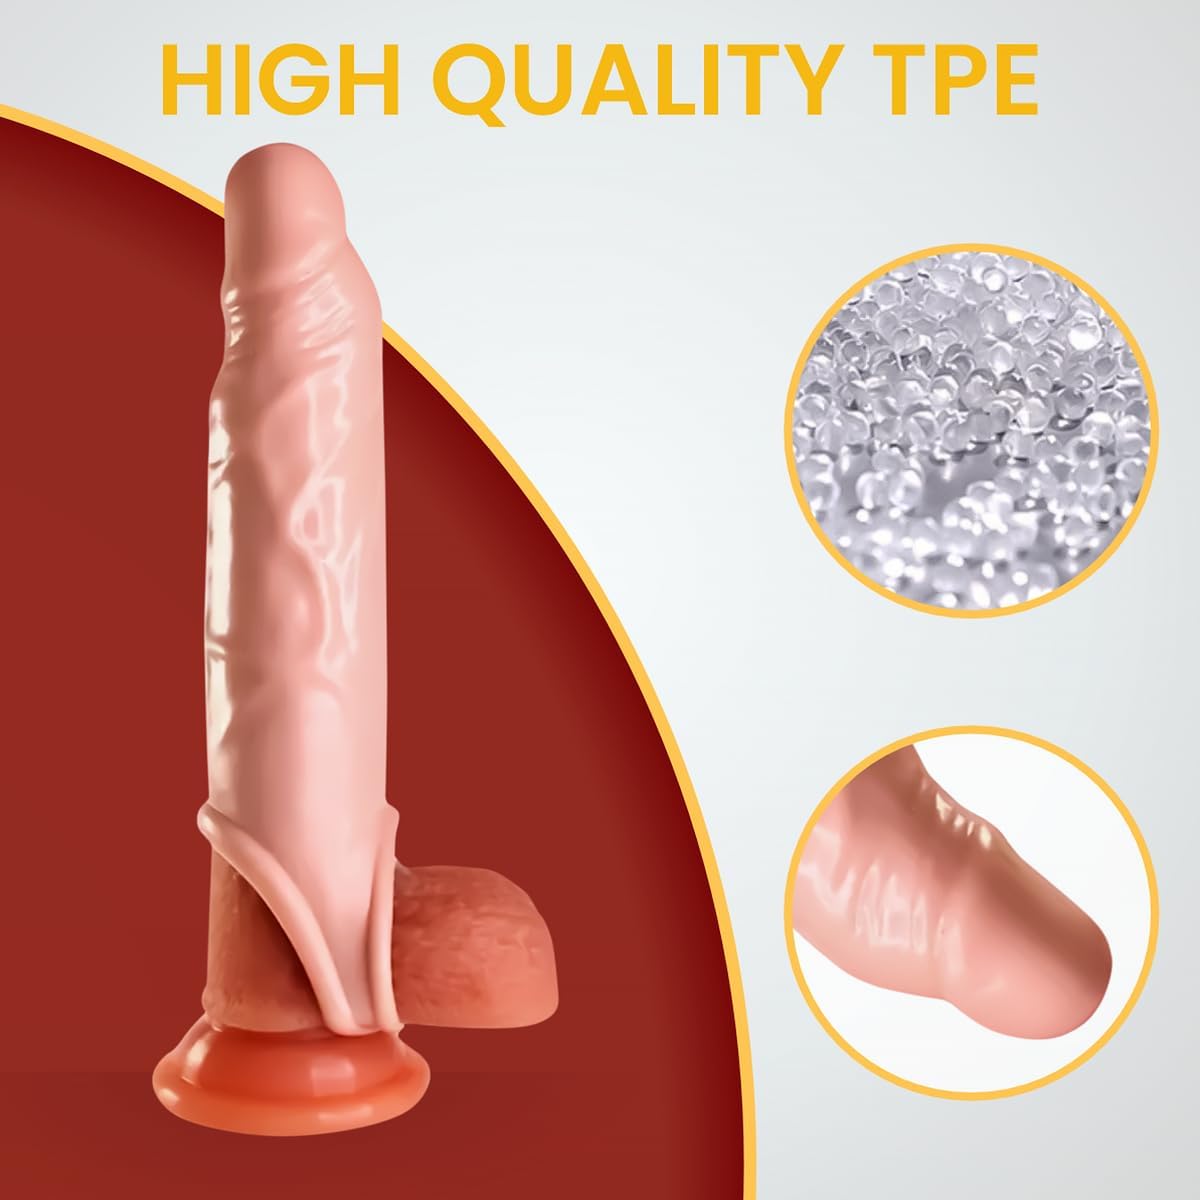 Boost Confidence and Pleasure with 1.6-inch Penis Sleeve